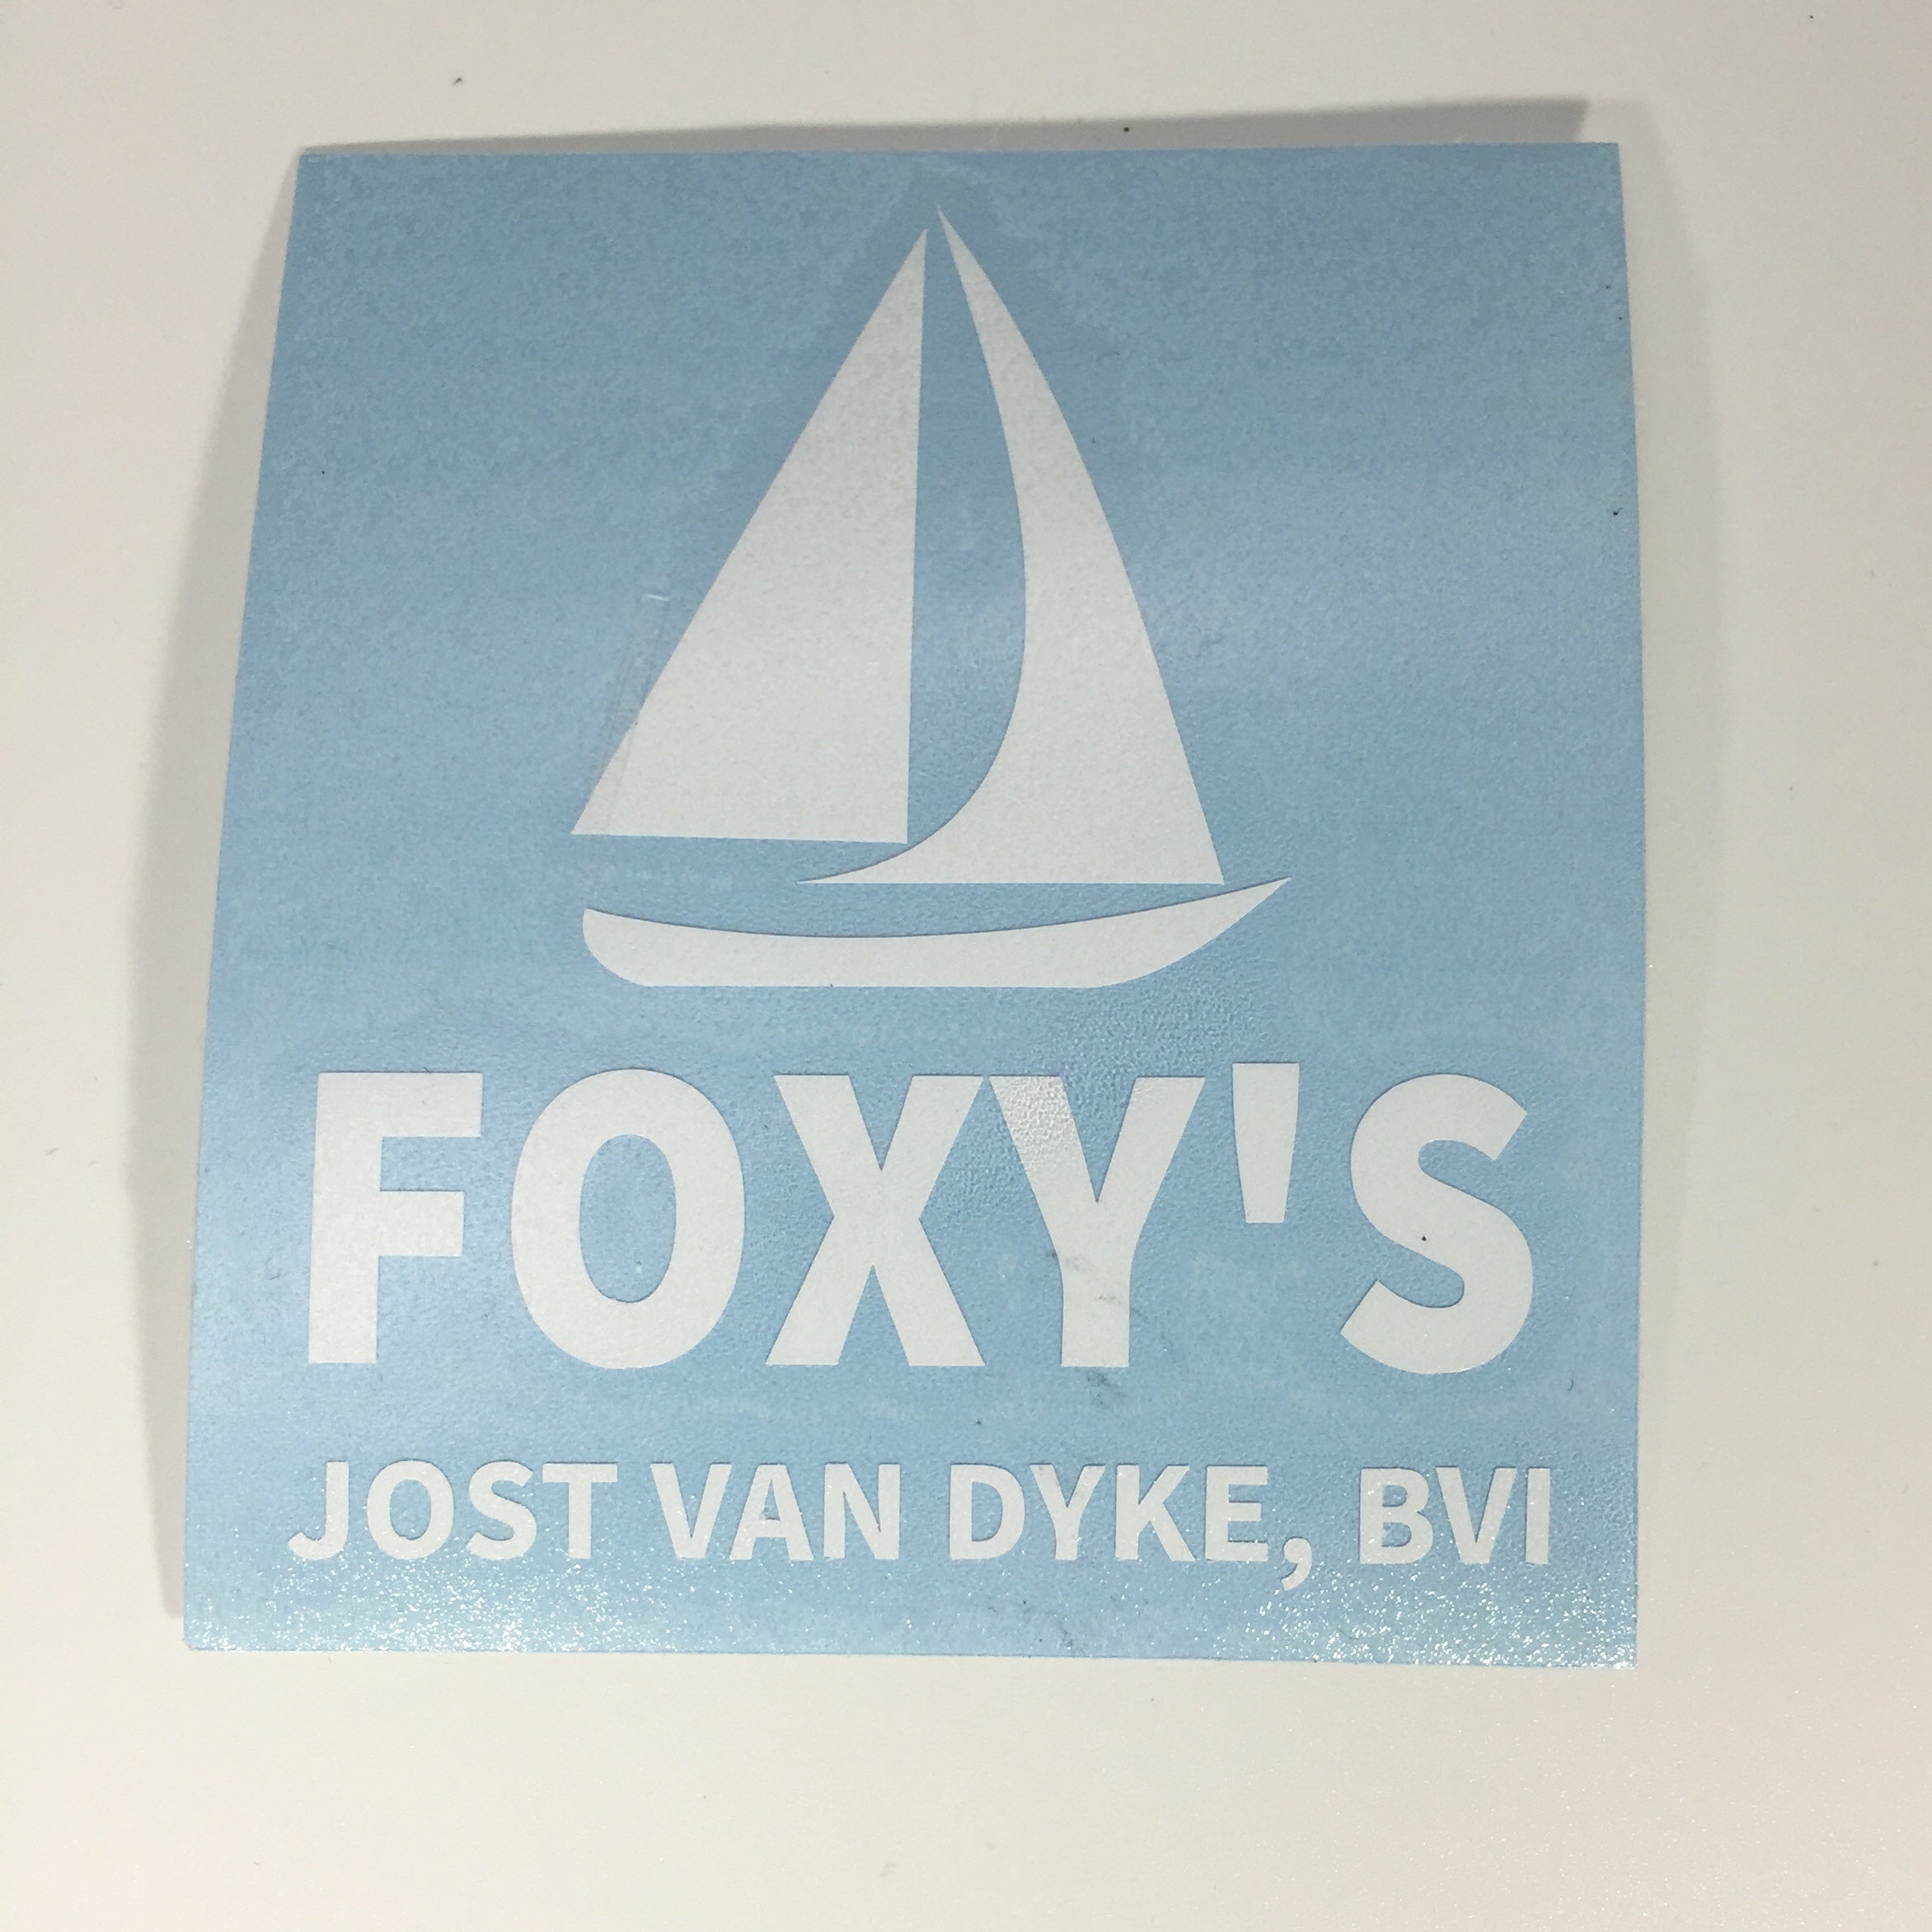 Foxy's ‘Sailboat' Transparent Back Sticker- Navy, Red, White